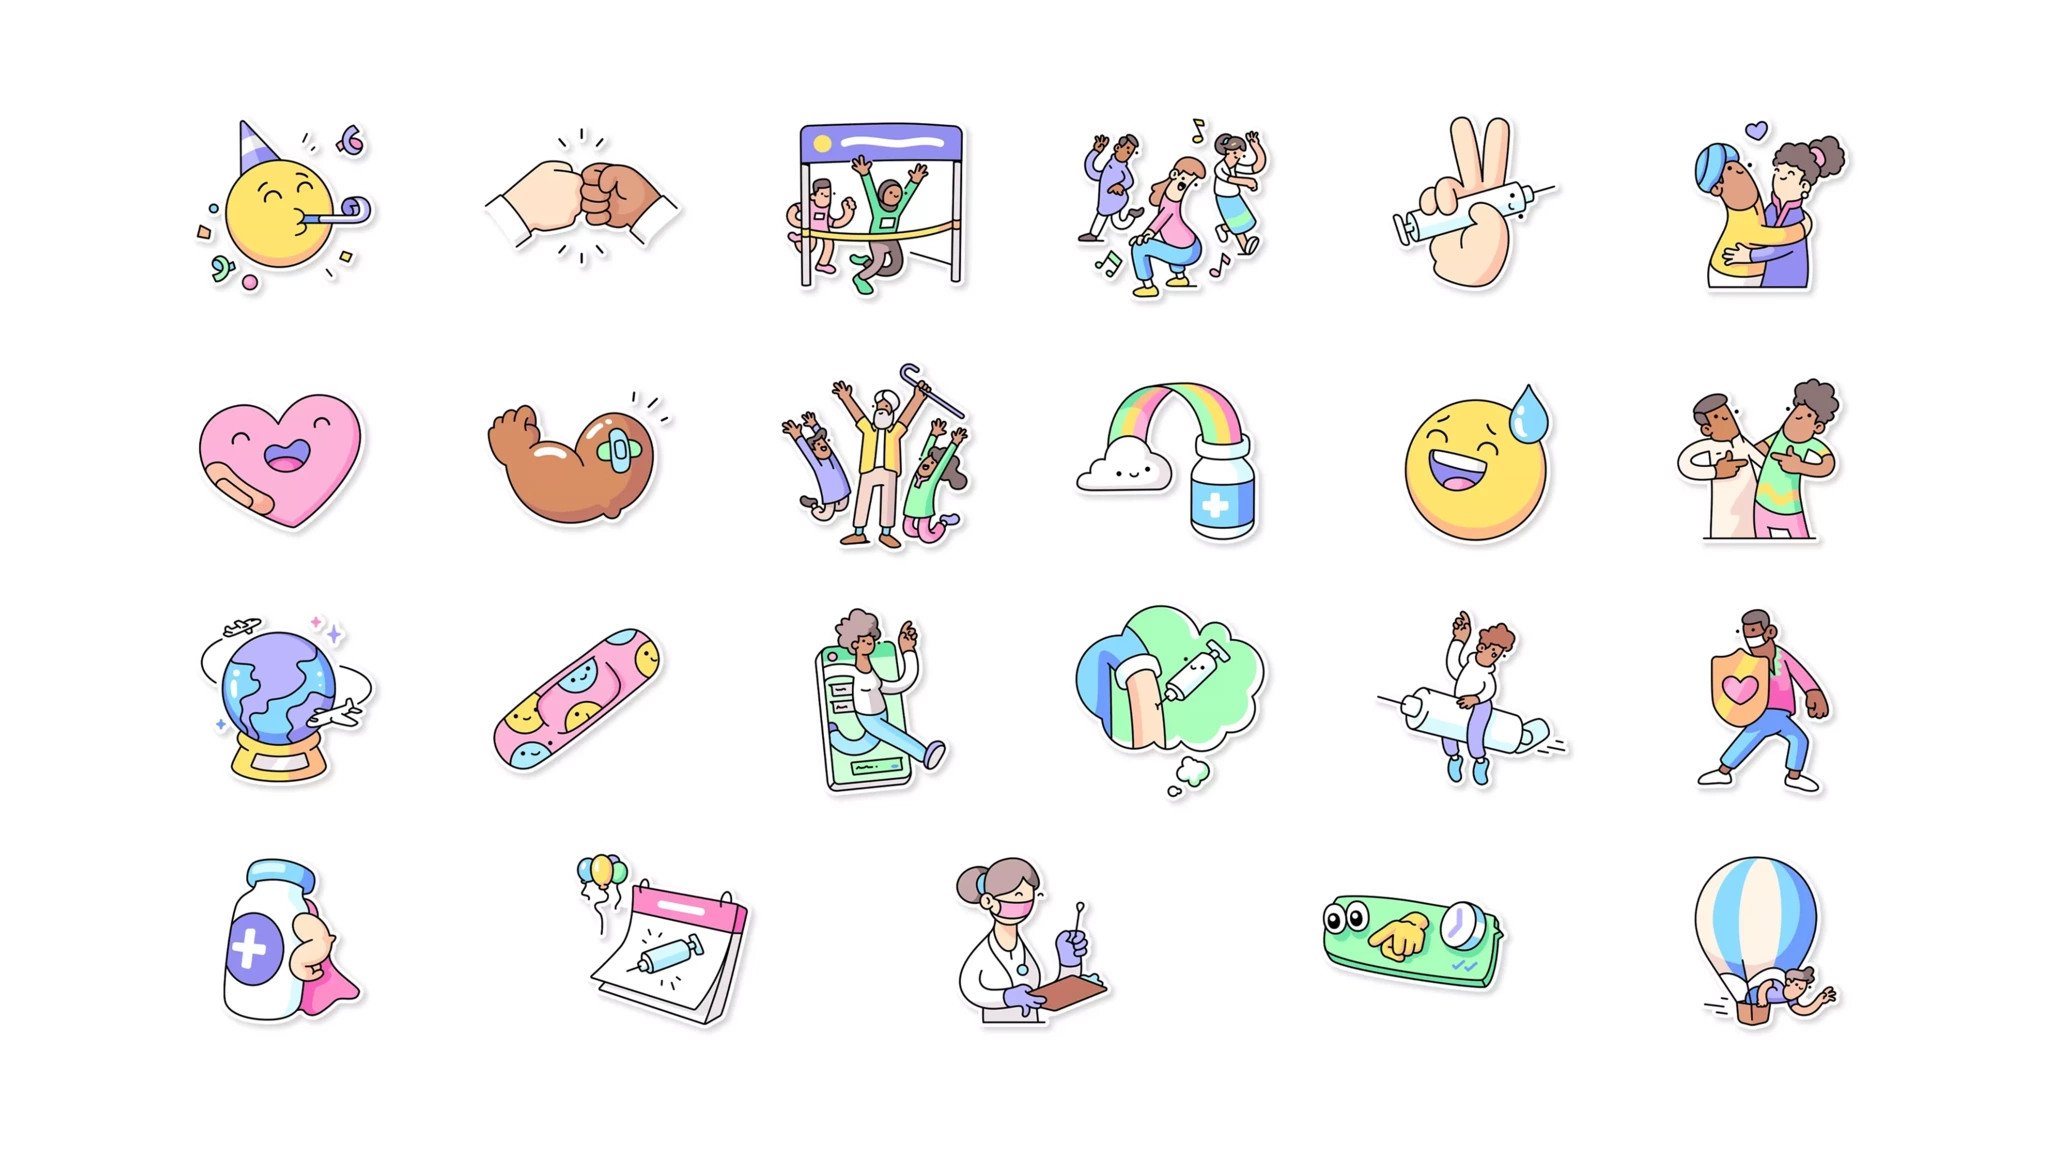 A selection of stickers from Whatsapp's Vaccines for All Sticker pack